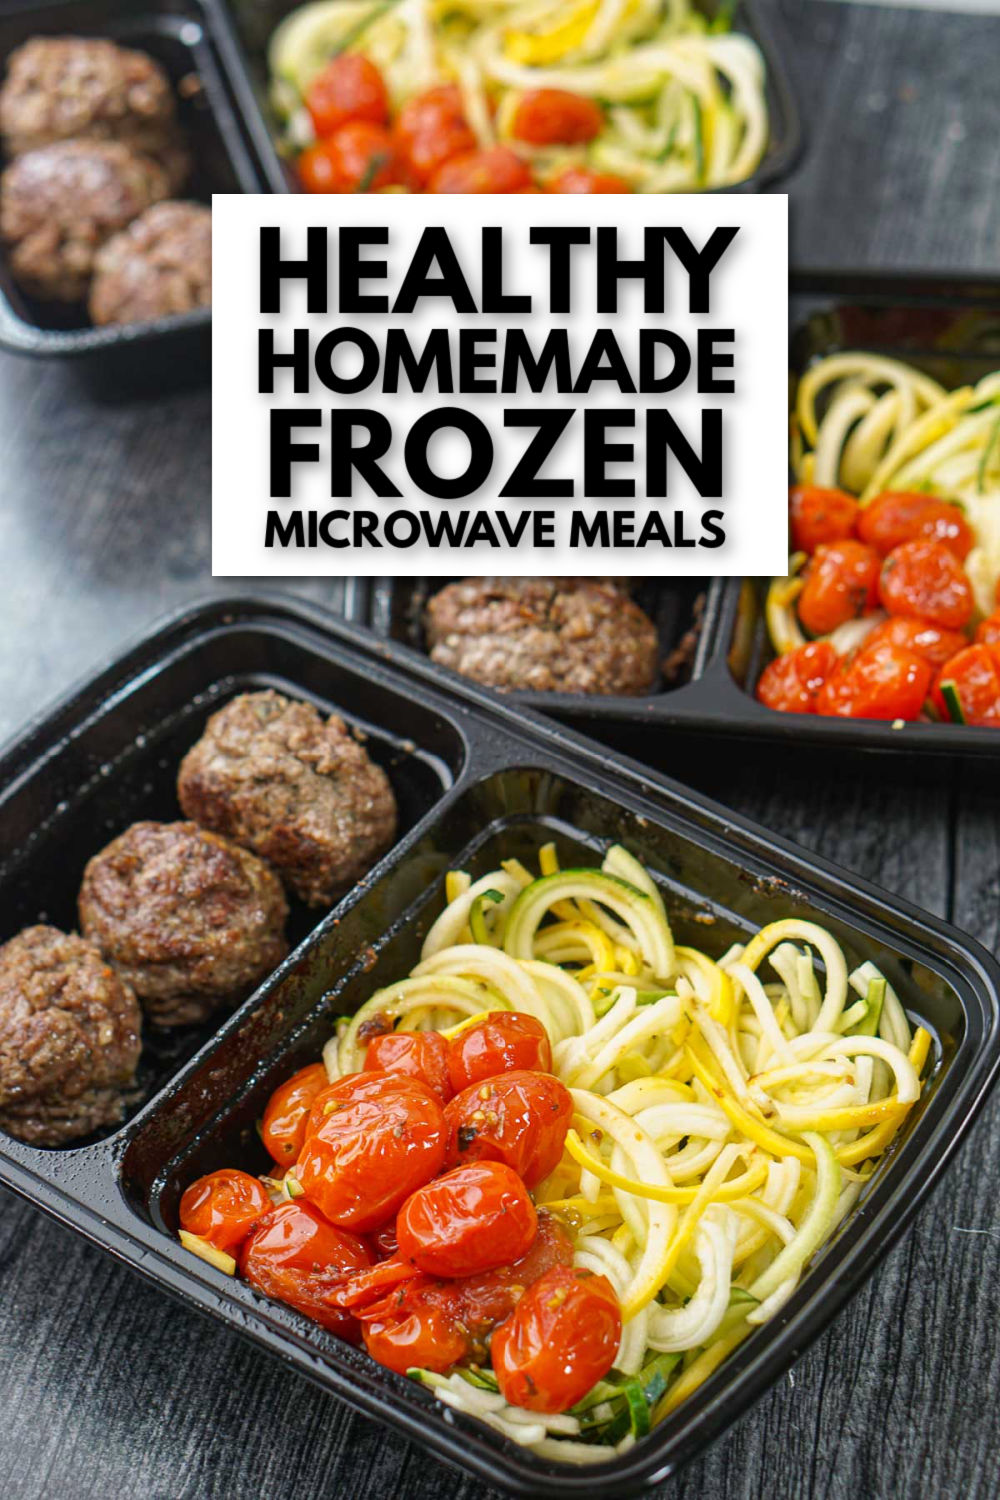 3 black freezer containers with healthy homemade microwave freezer meals with text